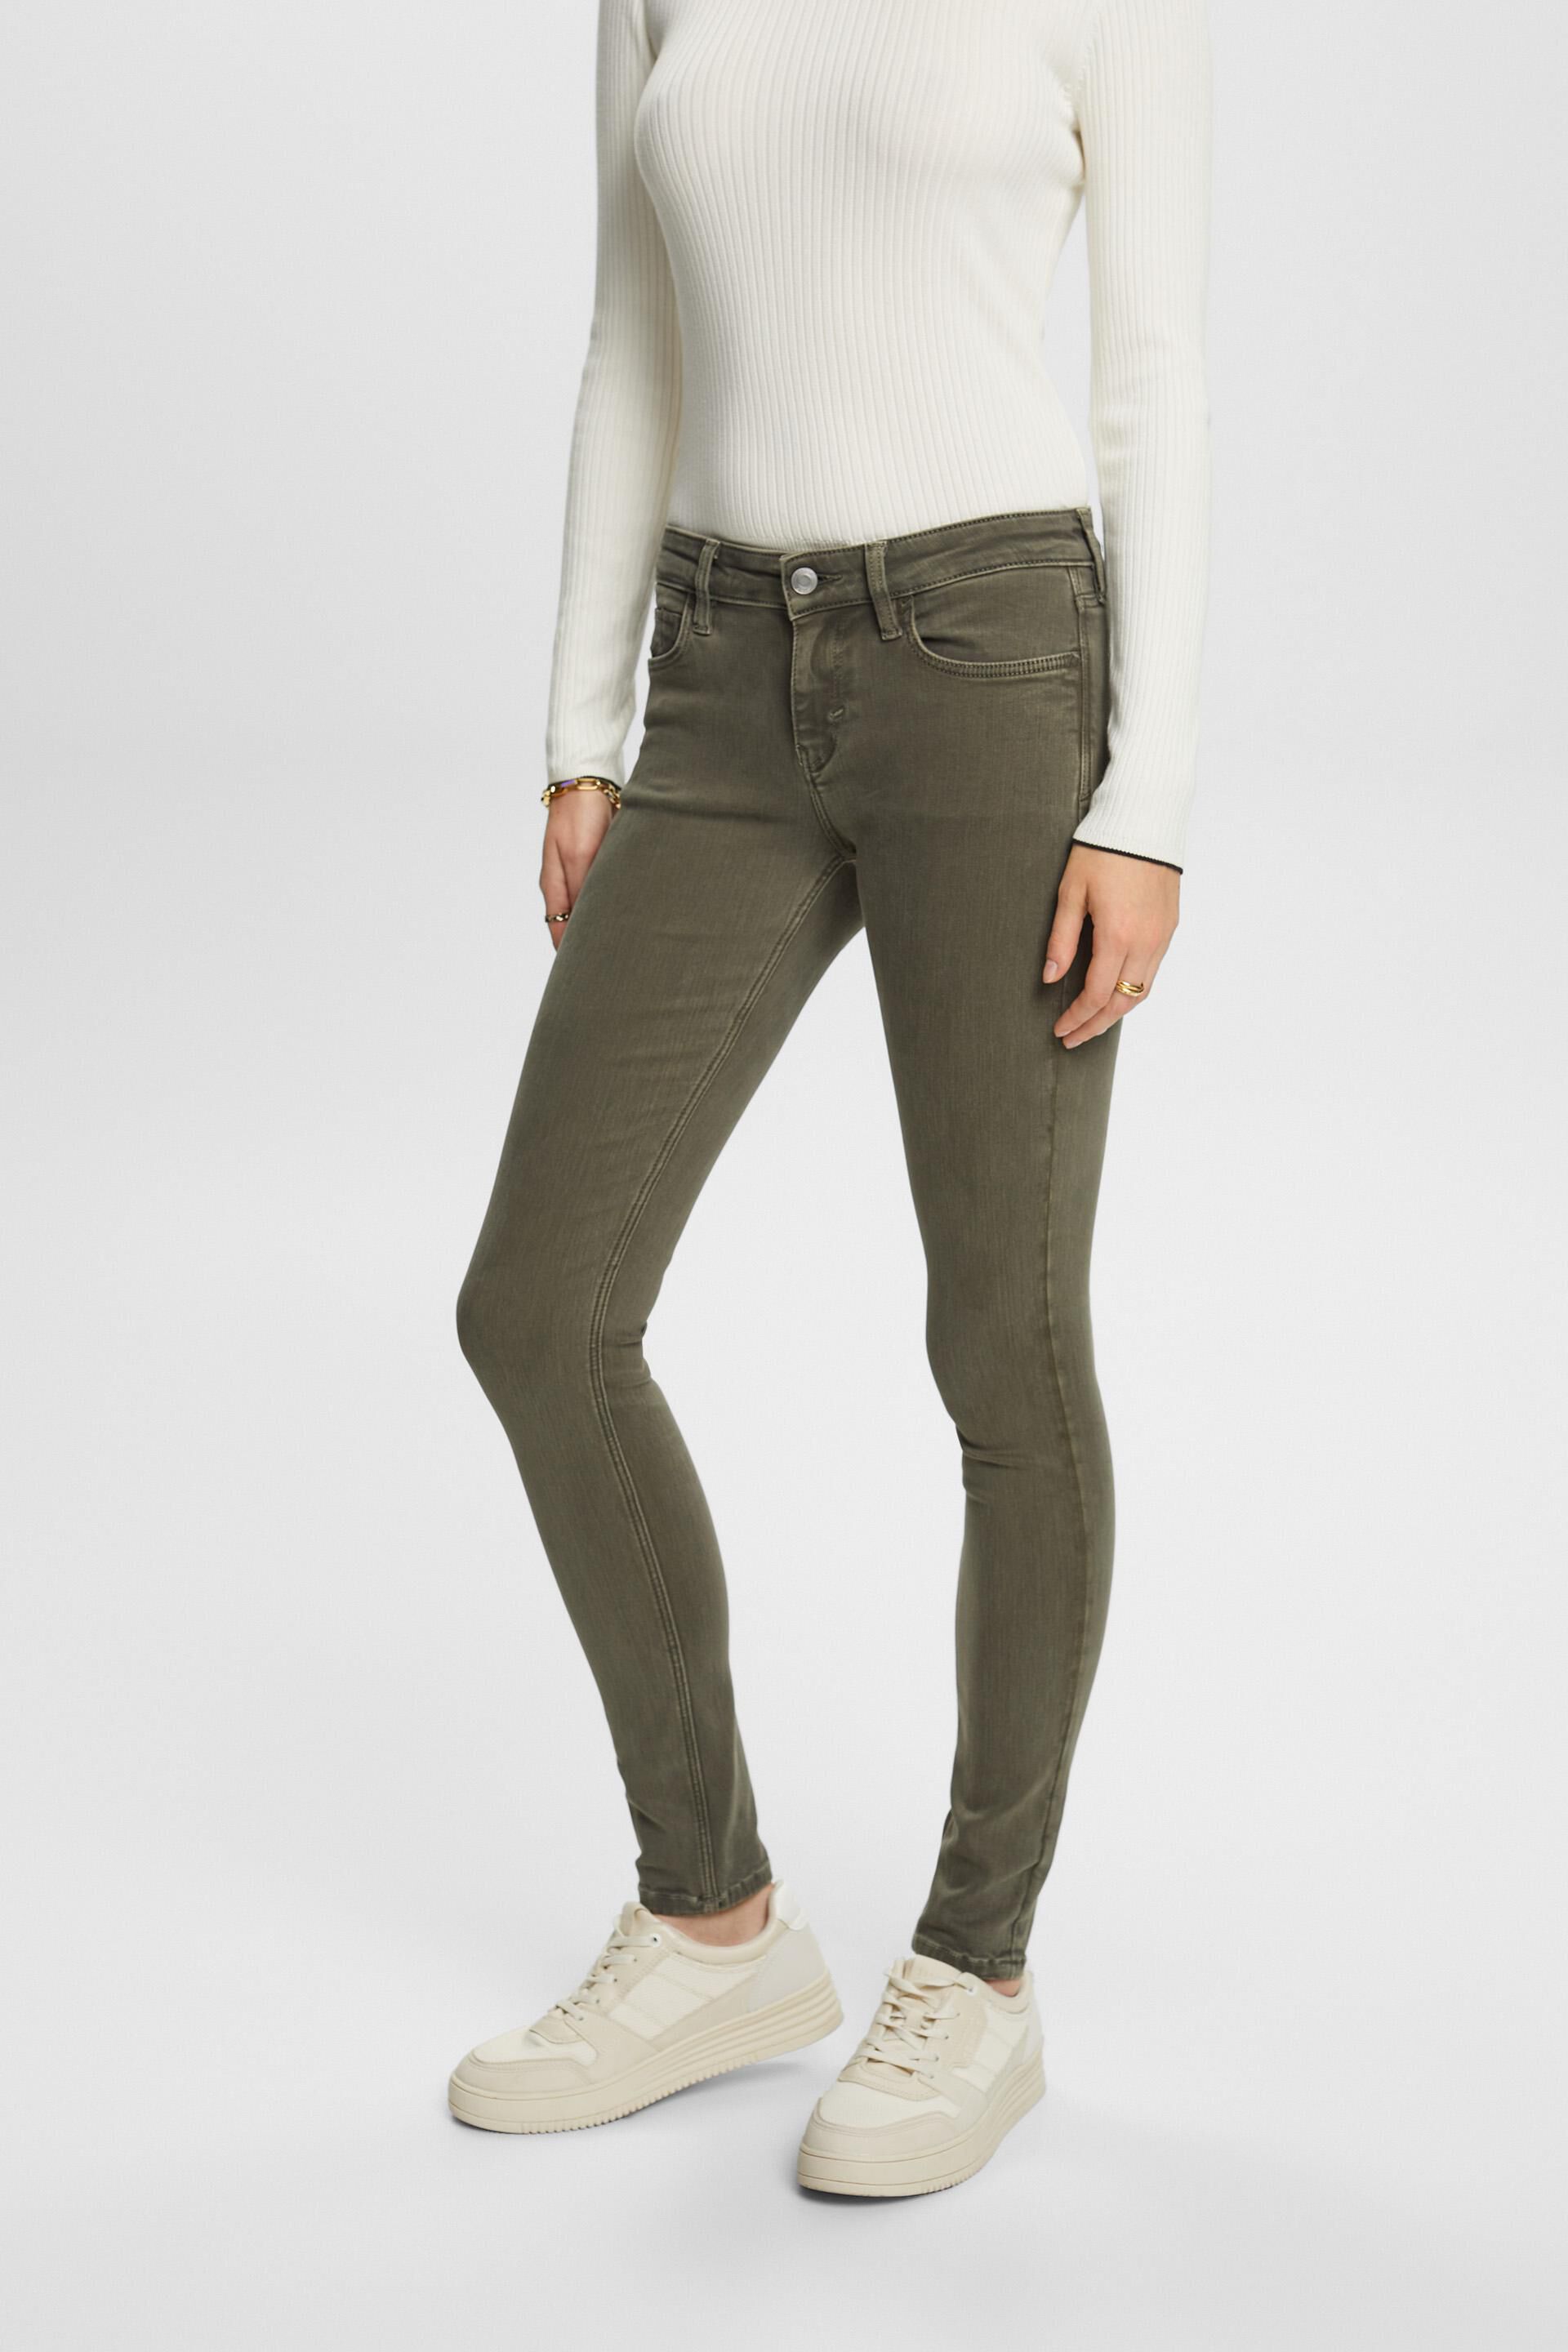 Esprit mid-rise Skinny trousers